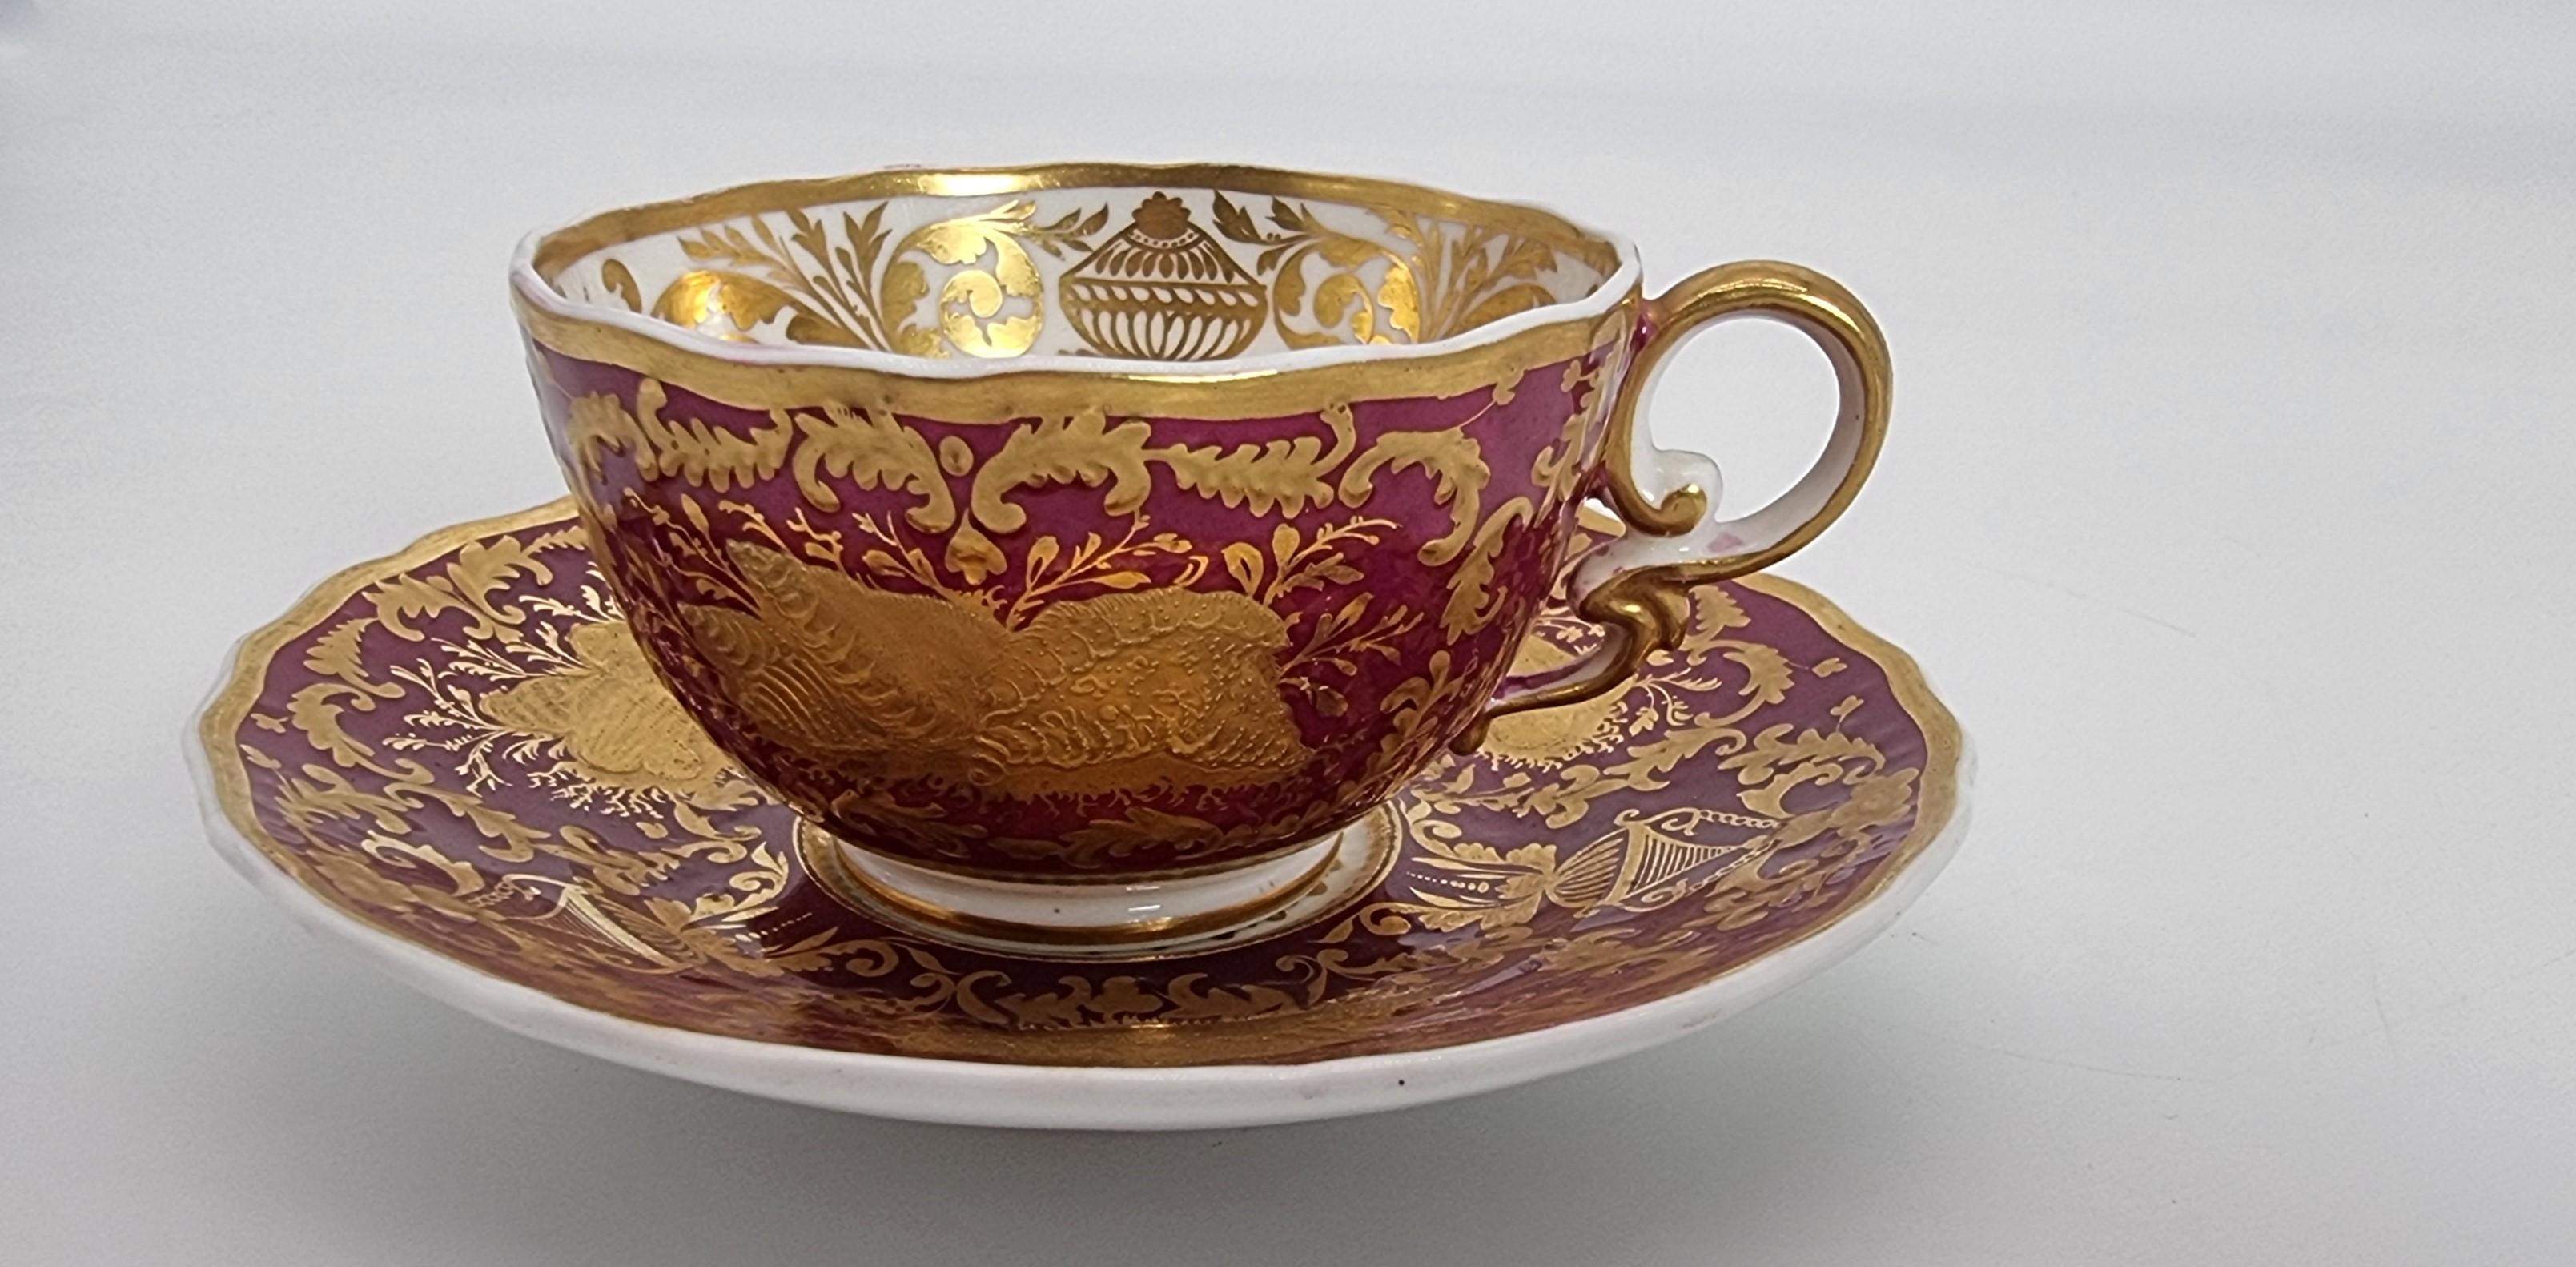 An exquisite and rare early 19th century Spode cabinet cup and saucer circa 1830 For Sale 12